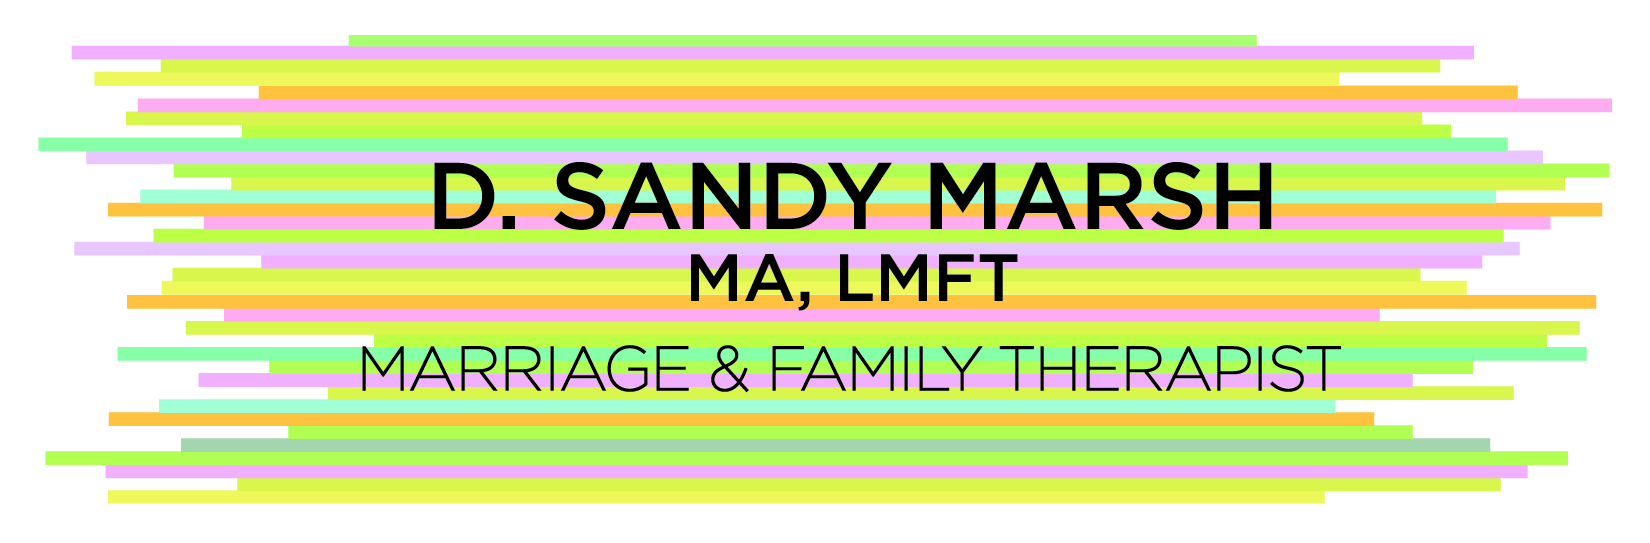 Marriage & Family Therapist in Los Angeles | Counseling & Therapy Services  - Sandy Marsh